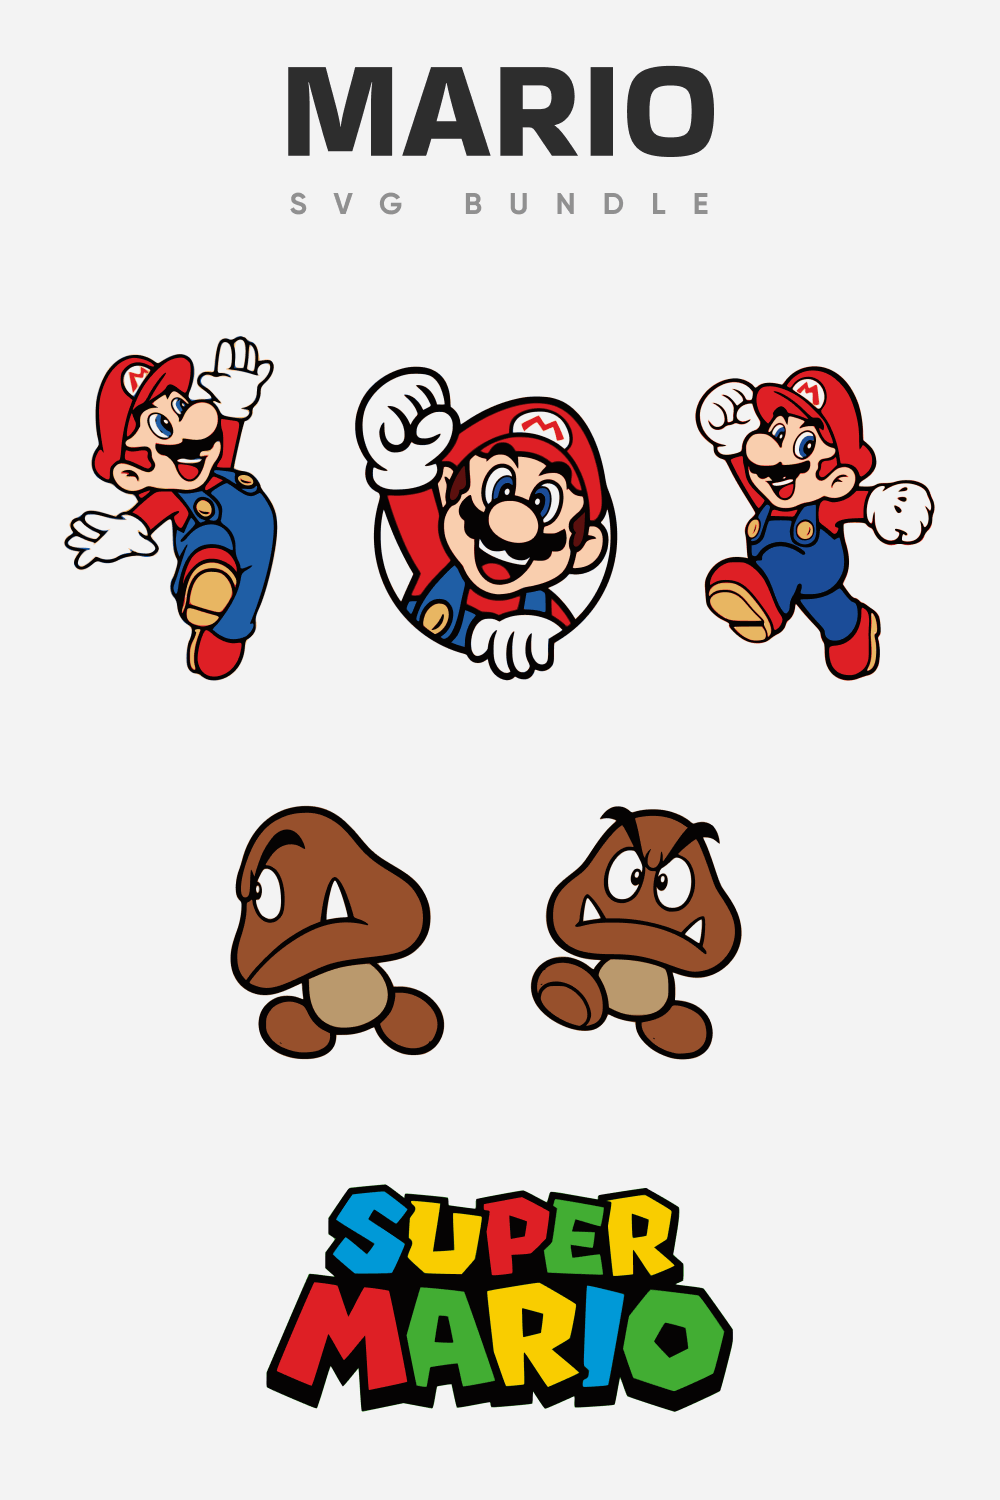 Mario in a red cap and red jacket, red shoes, blue overalls, and a picture of two angry brown worms.